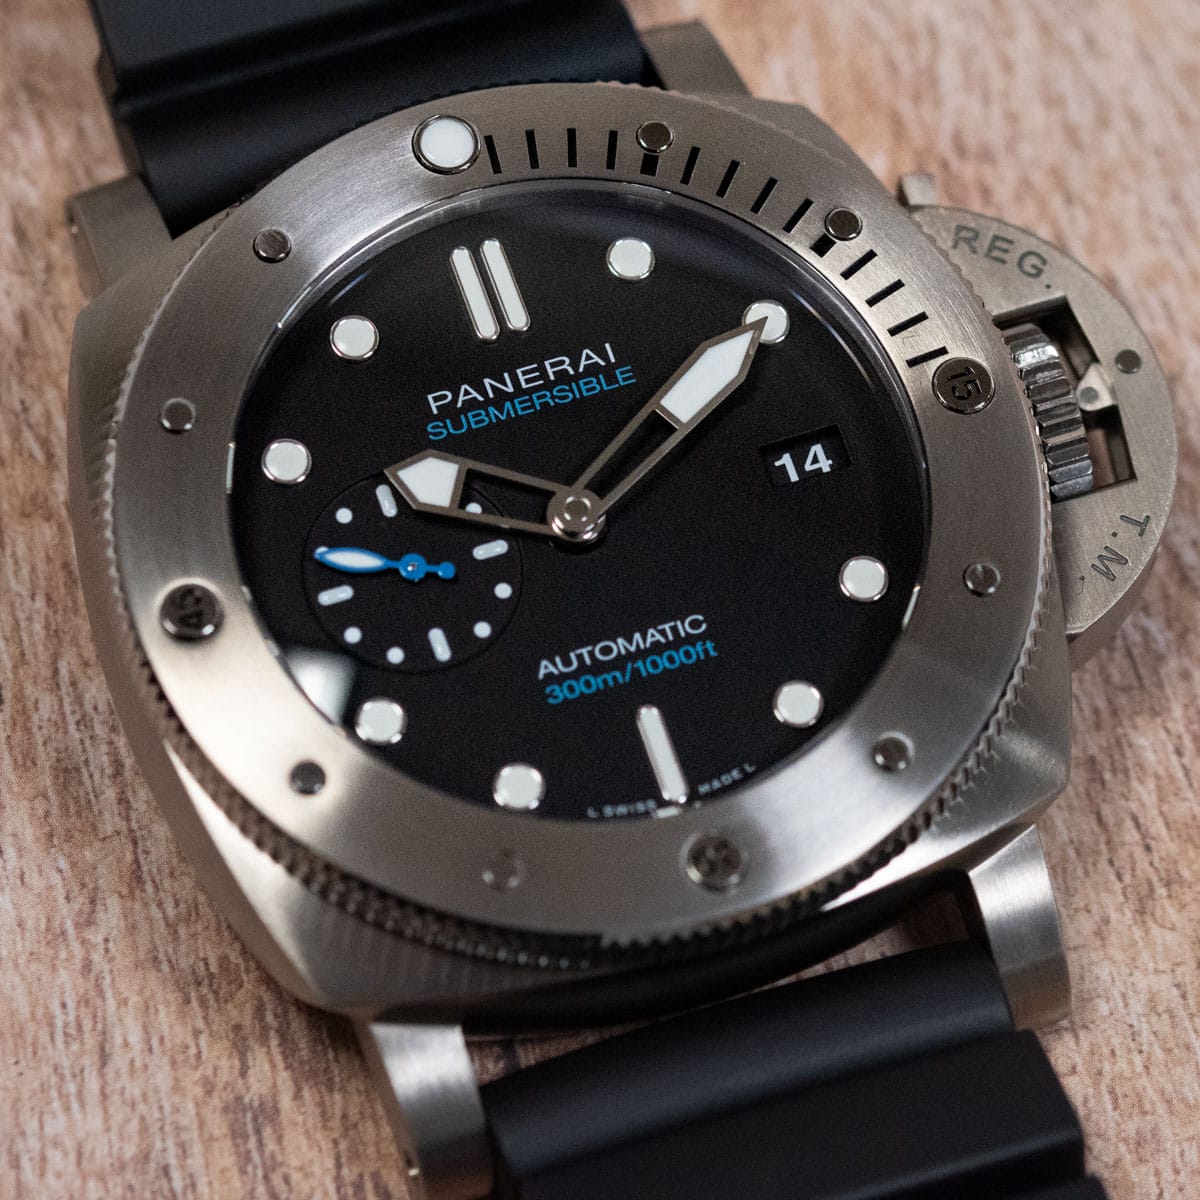 Stylied photo of  of Luminor Submersible 47MM